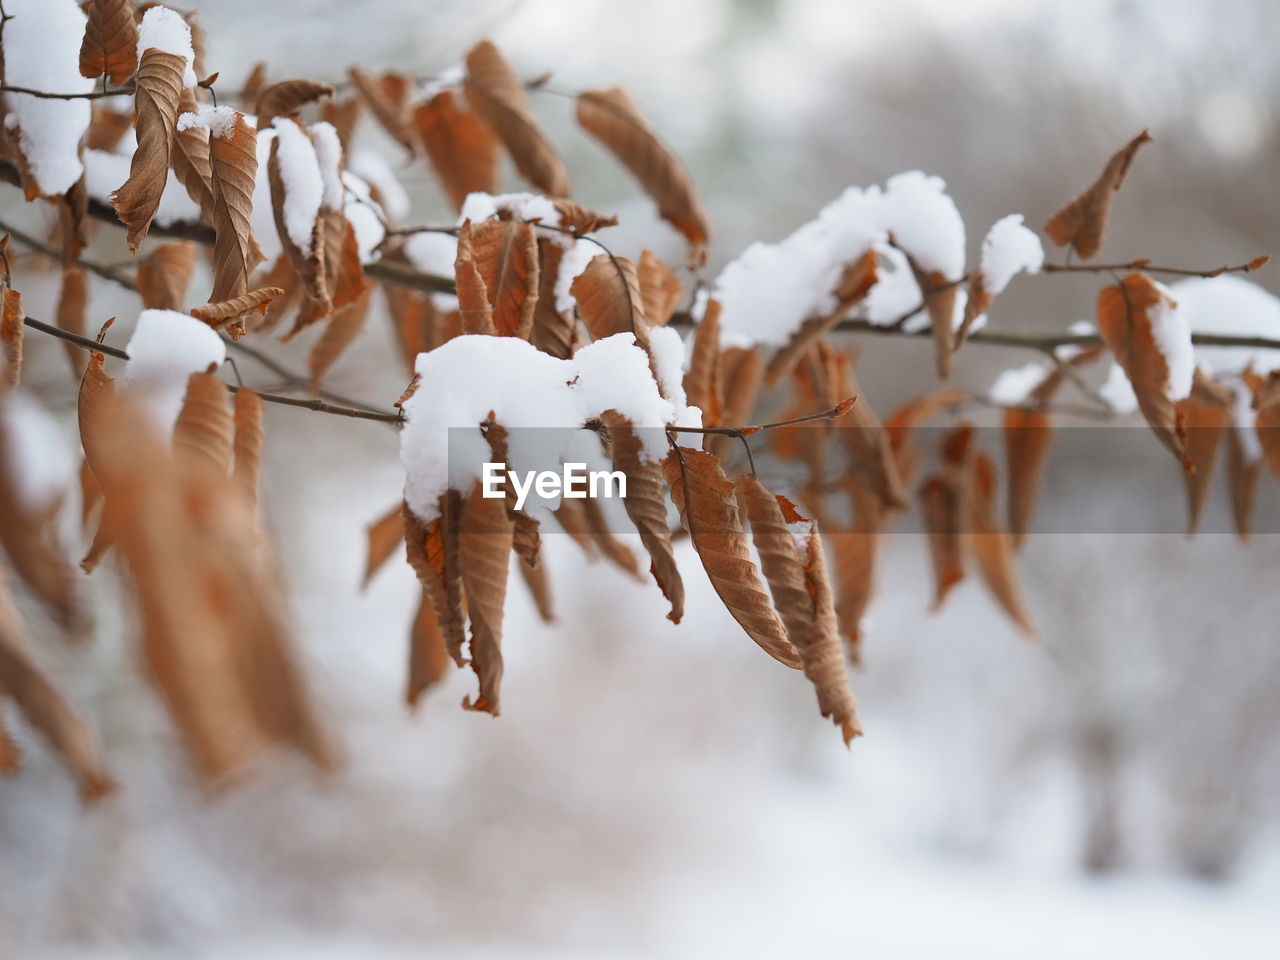 CLOSE-UP OF SNOW ON DRY LEAVES